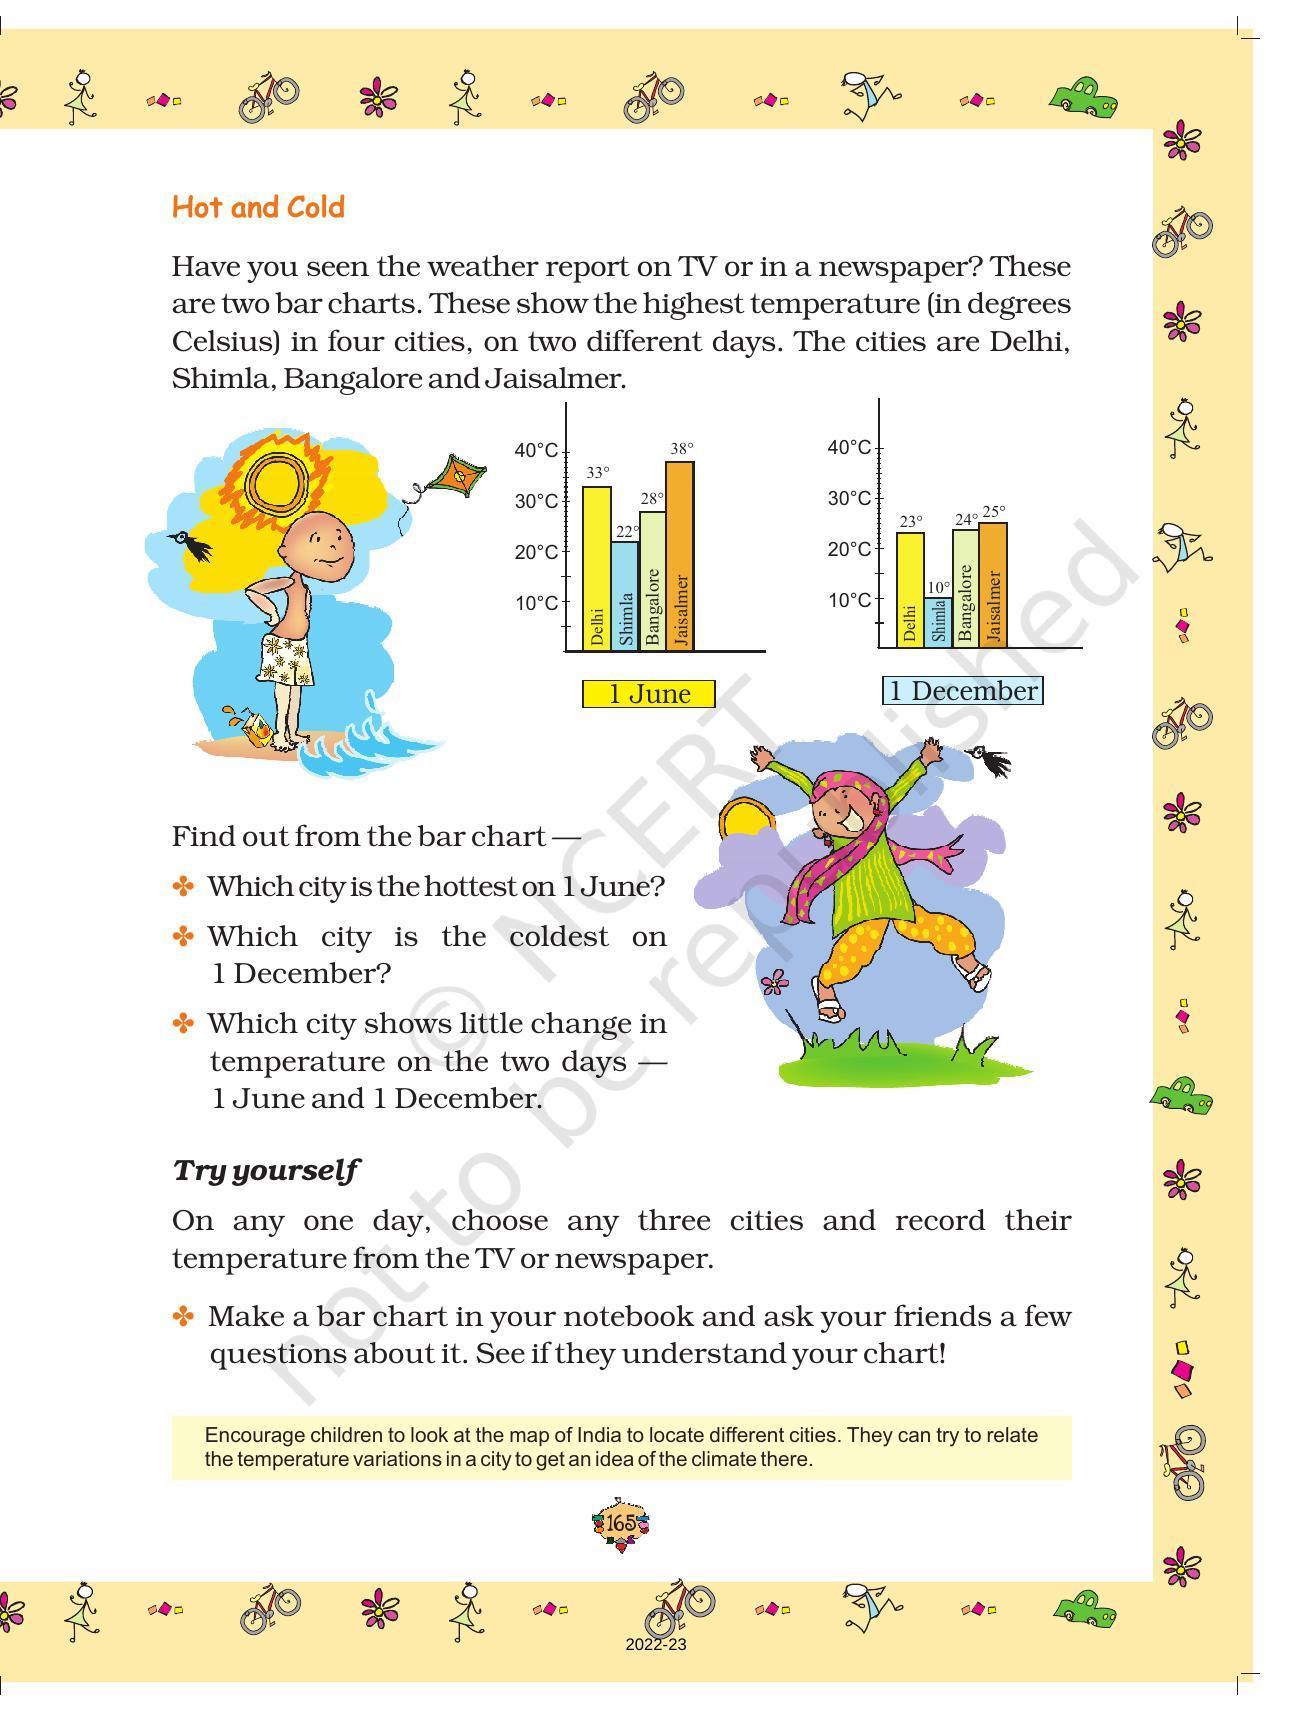 NCERT Book for Class 5 Maths Chapter 12 Smart Charts - Page 7